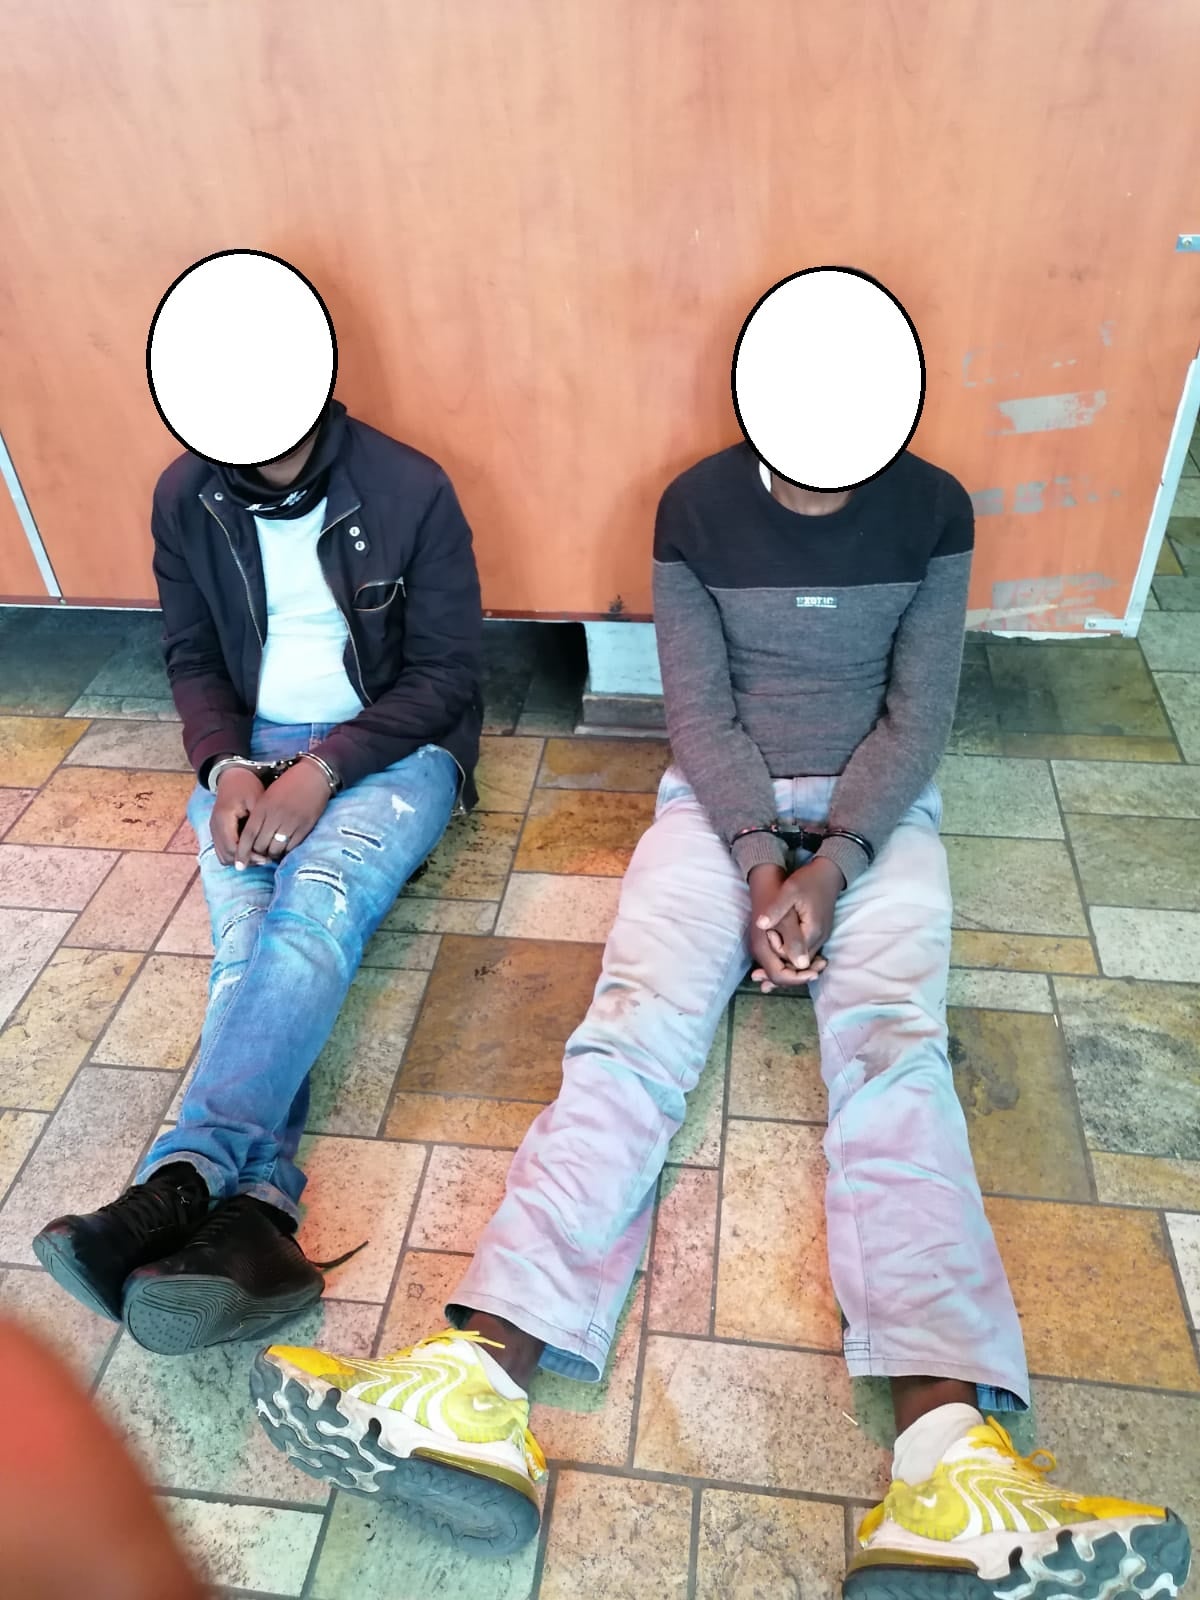 Two more suspects behind bars in connection with a foiled robbery